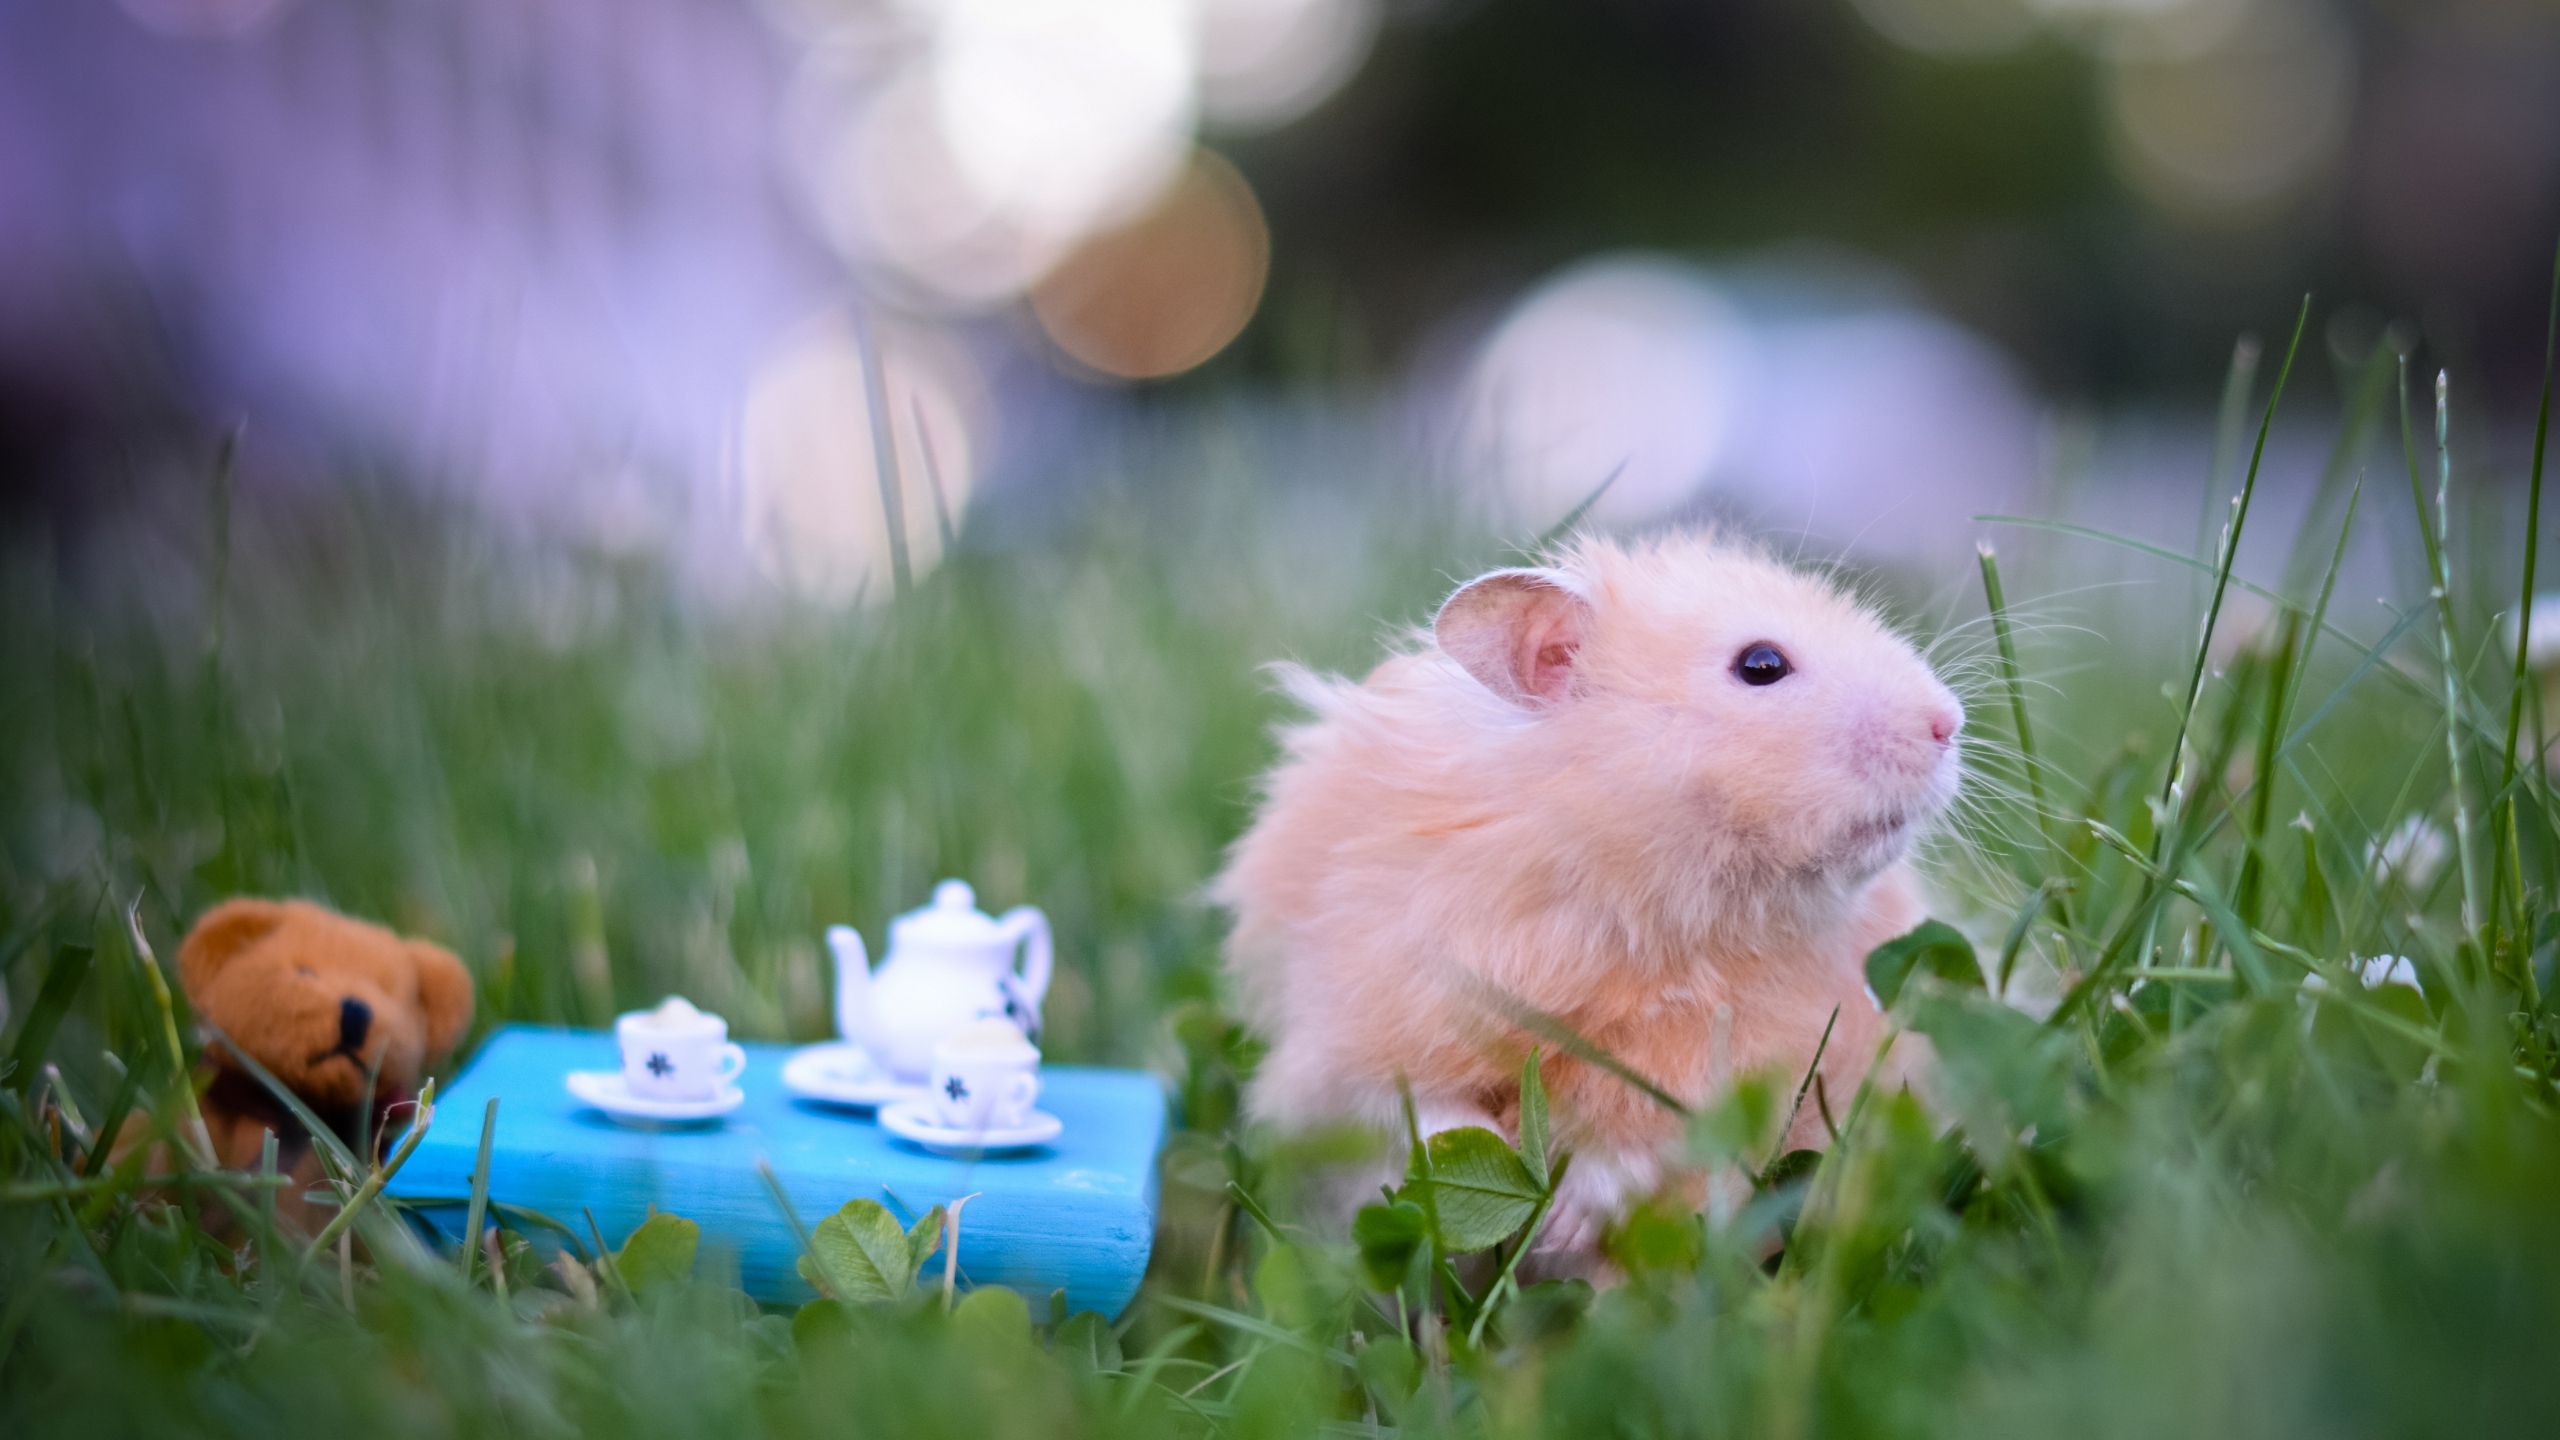  on July 28 2015 By Stephen Comments Off on Cute Hamsters Wallpapers